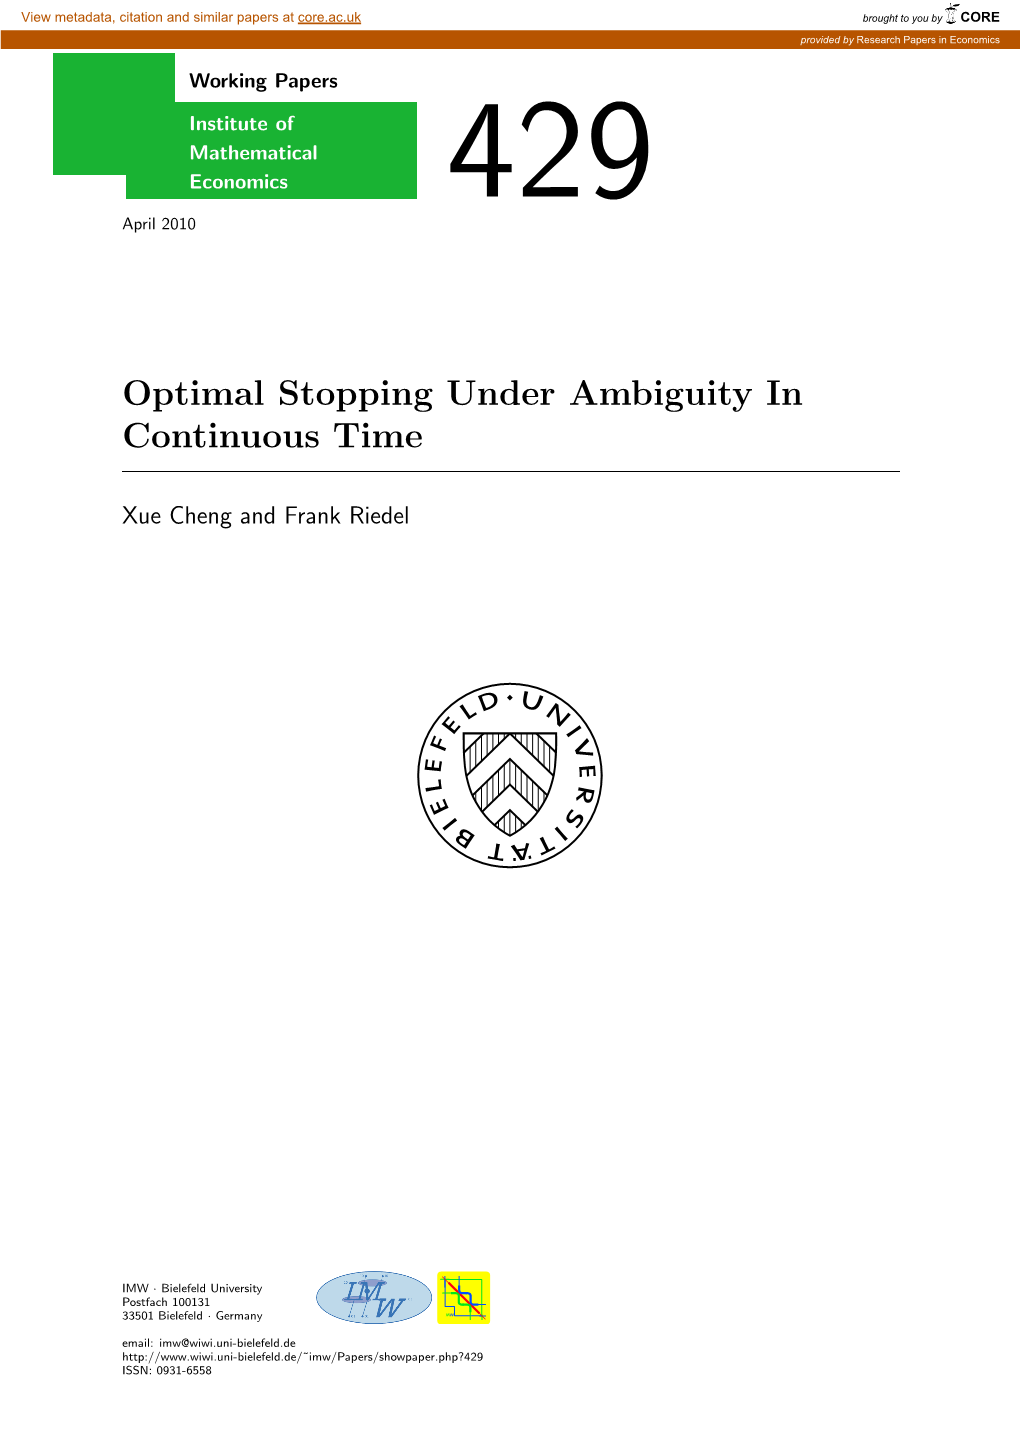 Optimal Stopping Under Ambiguity in Continuous Time